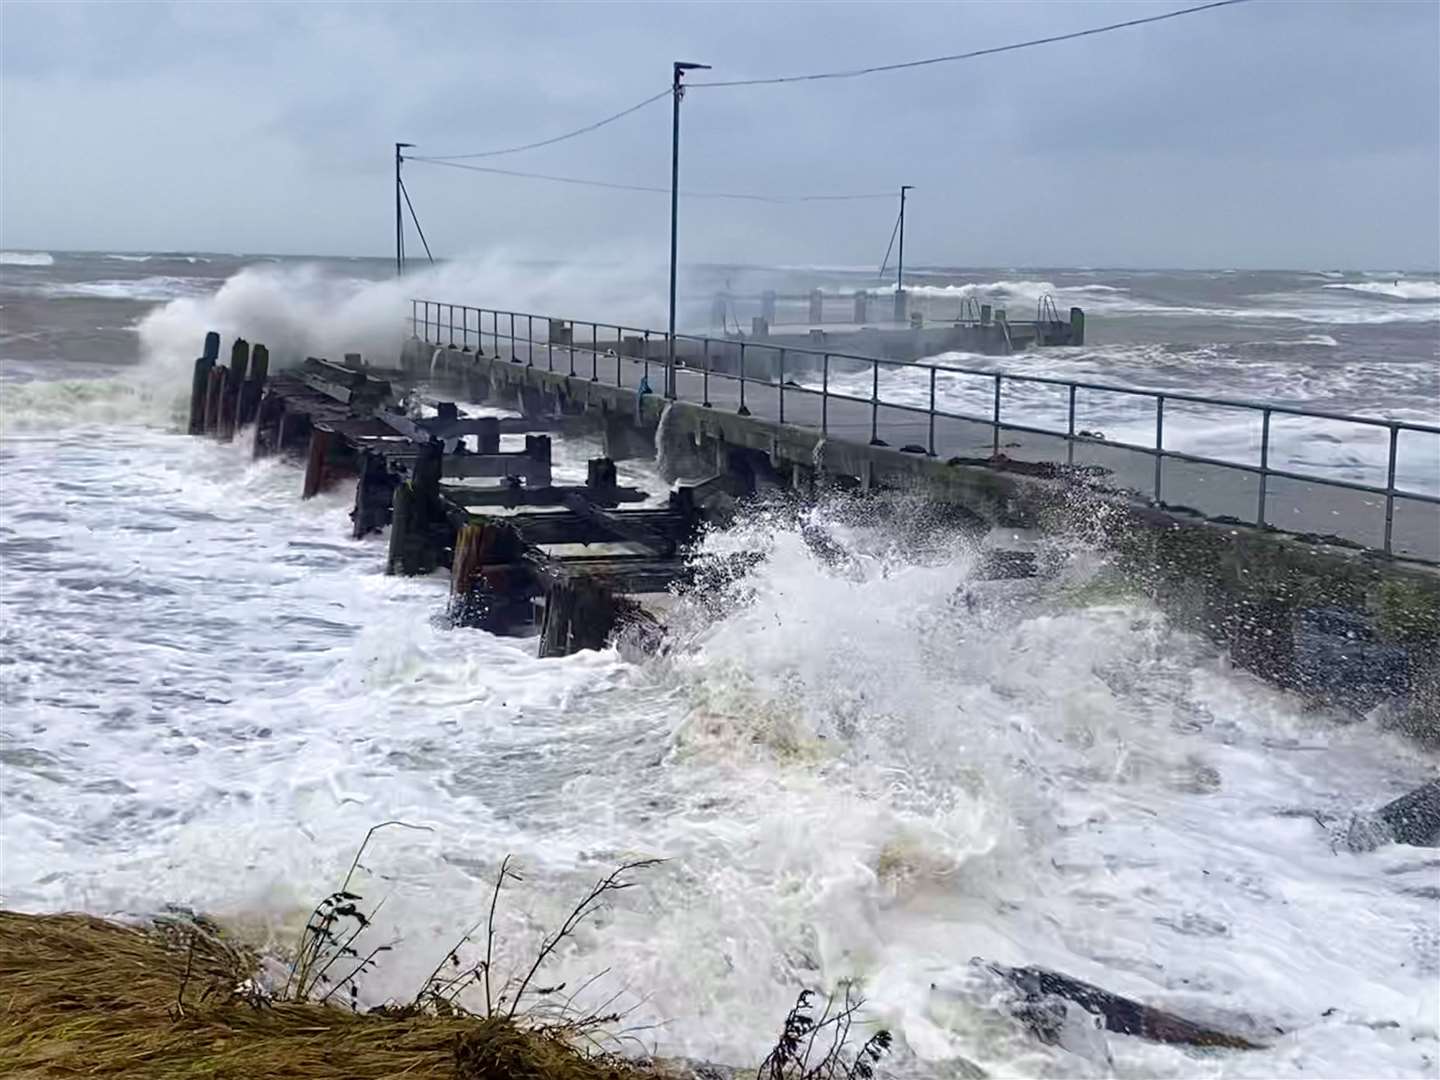 The pier at Golspie during the weekend's storm. Photographer David Richardson watched as a massive 25-foot spar from the old pier was banged about within its uprights until eventually escaping into the open sea.